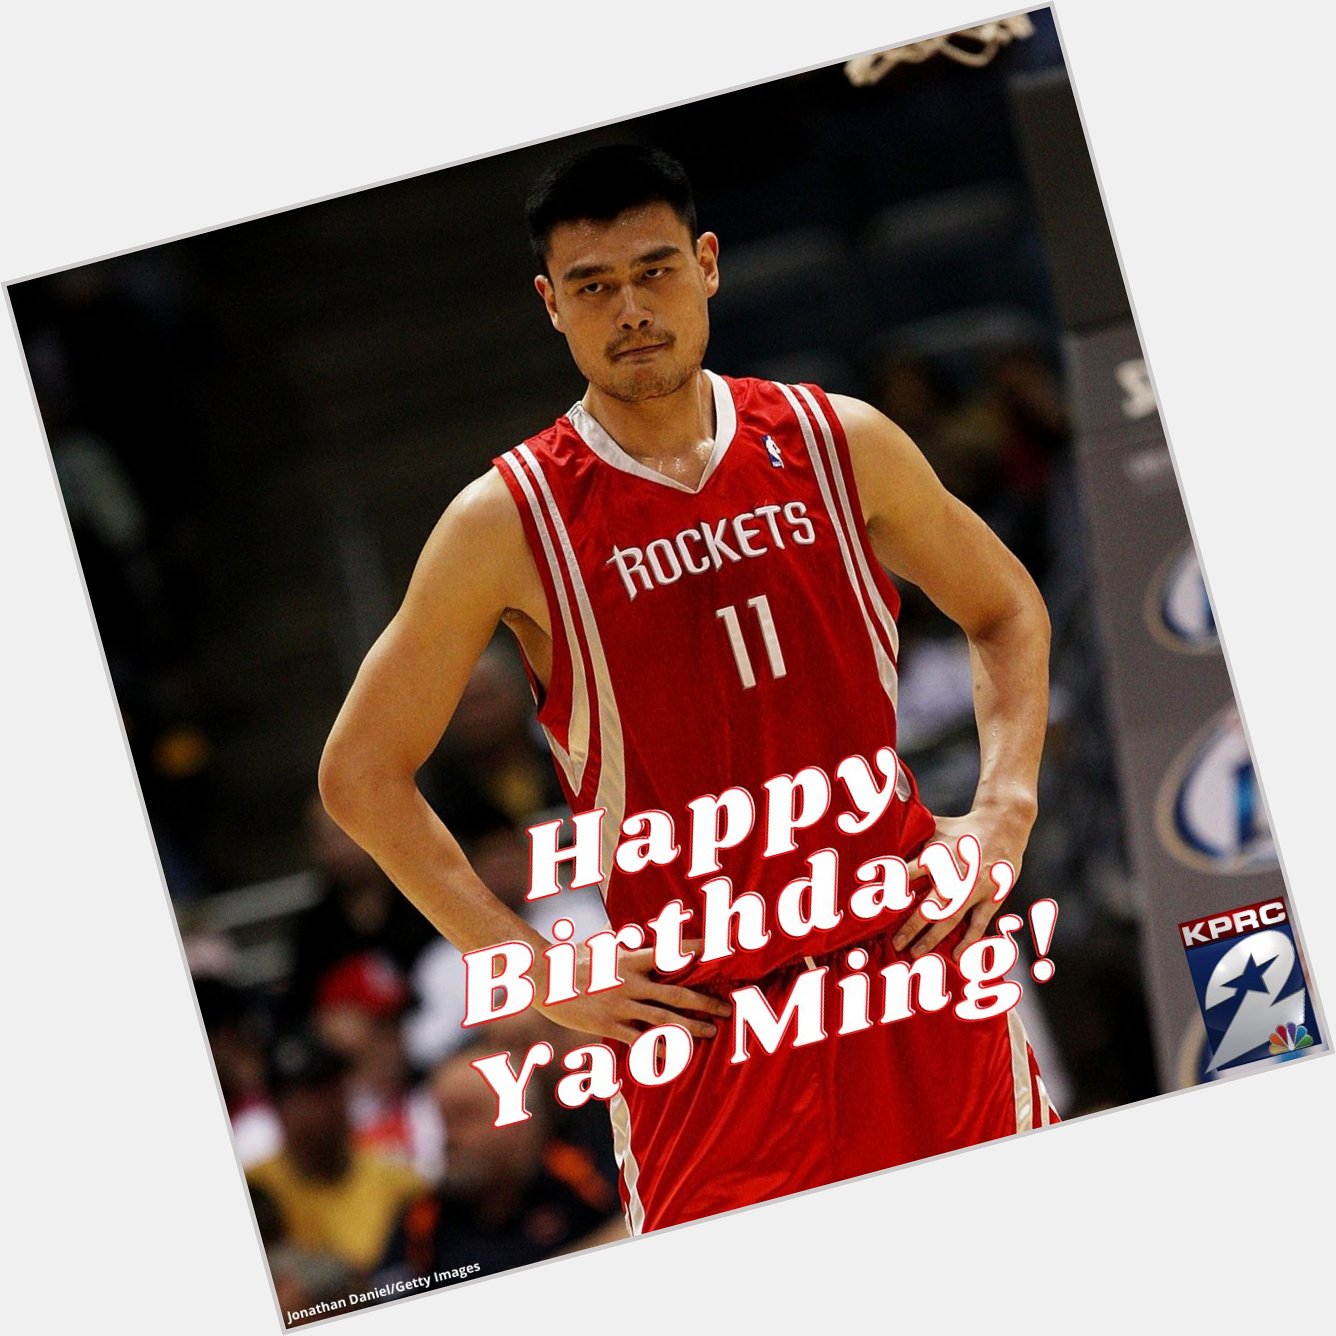 Houston, let\s wish a happy birthday to former star and Basketball Hall of Famer Yao Ming!  